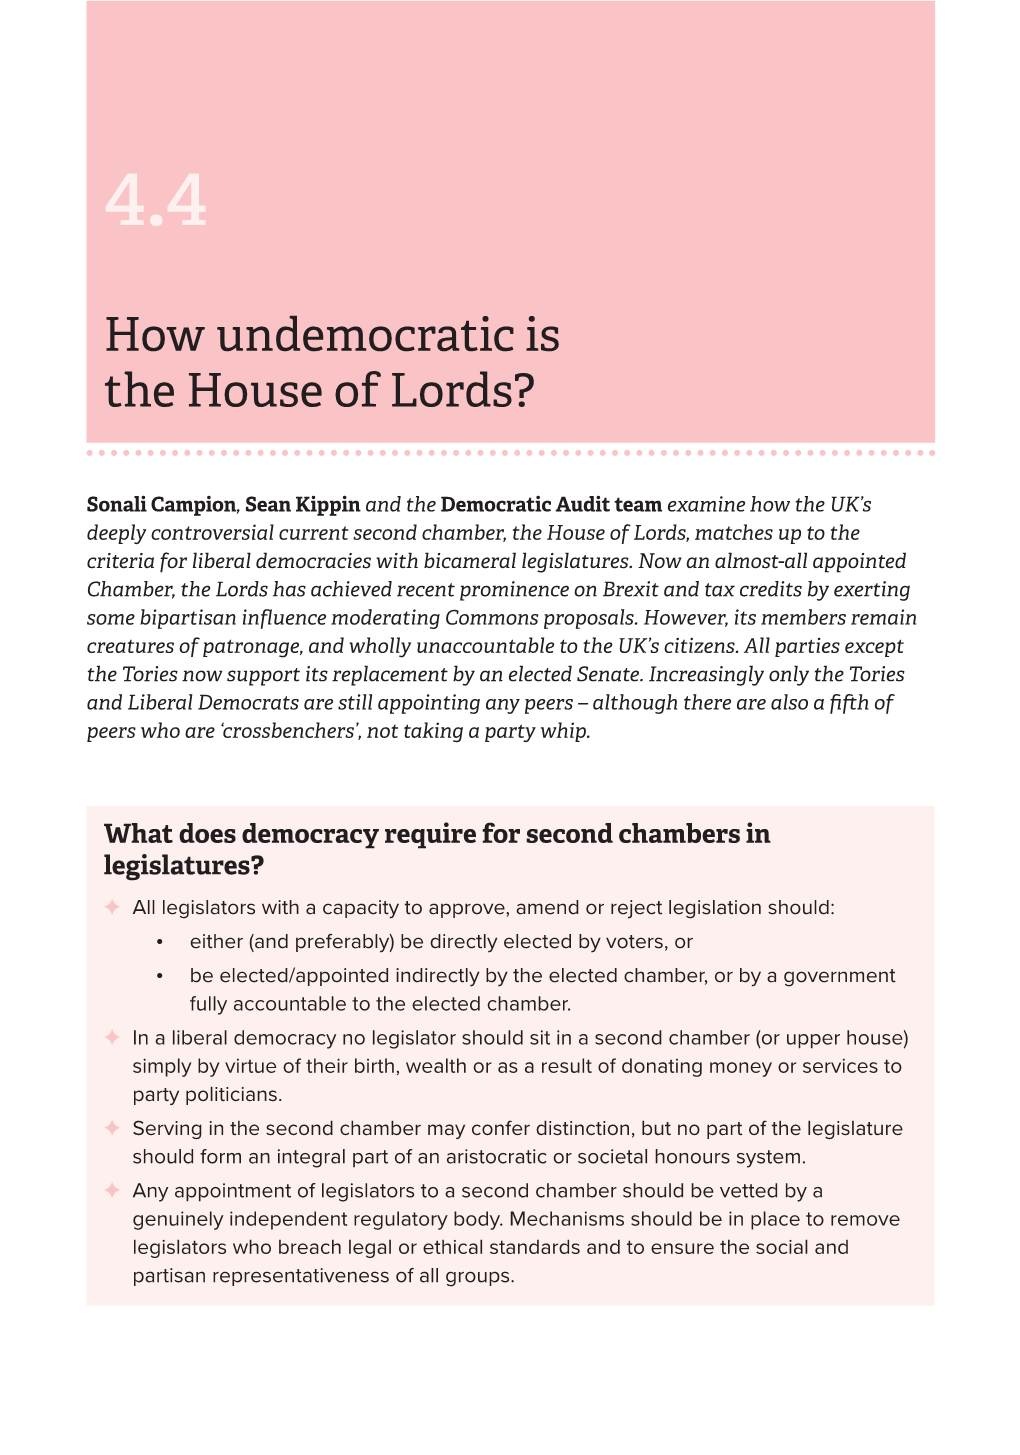 How Undemocratic Is the House of Lords?